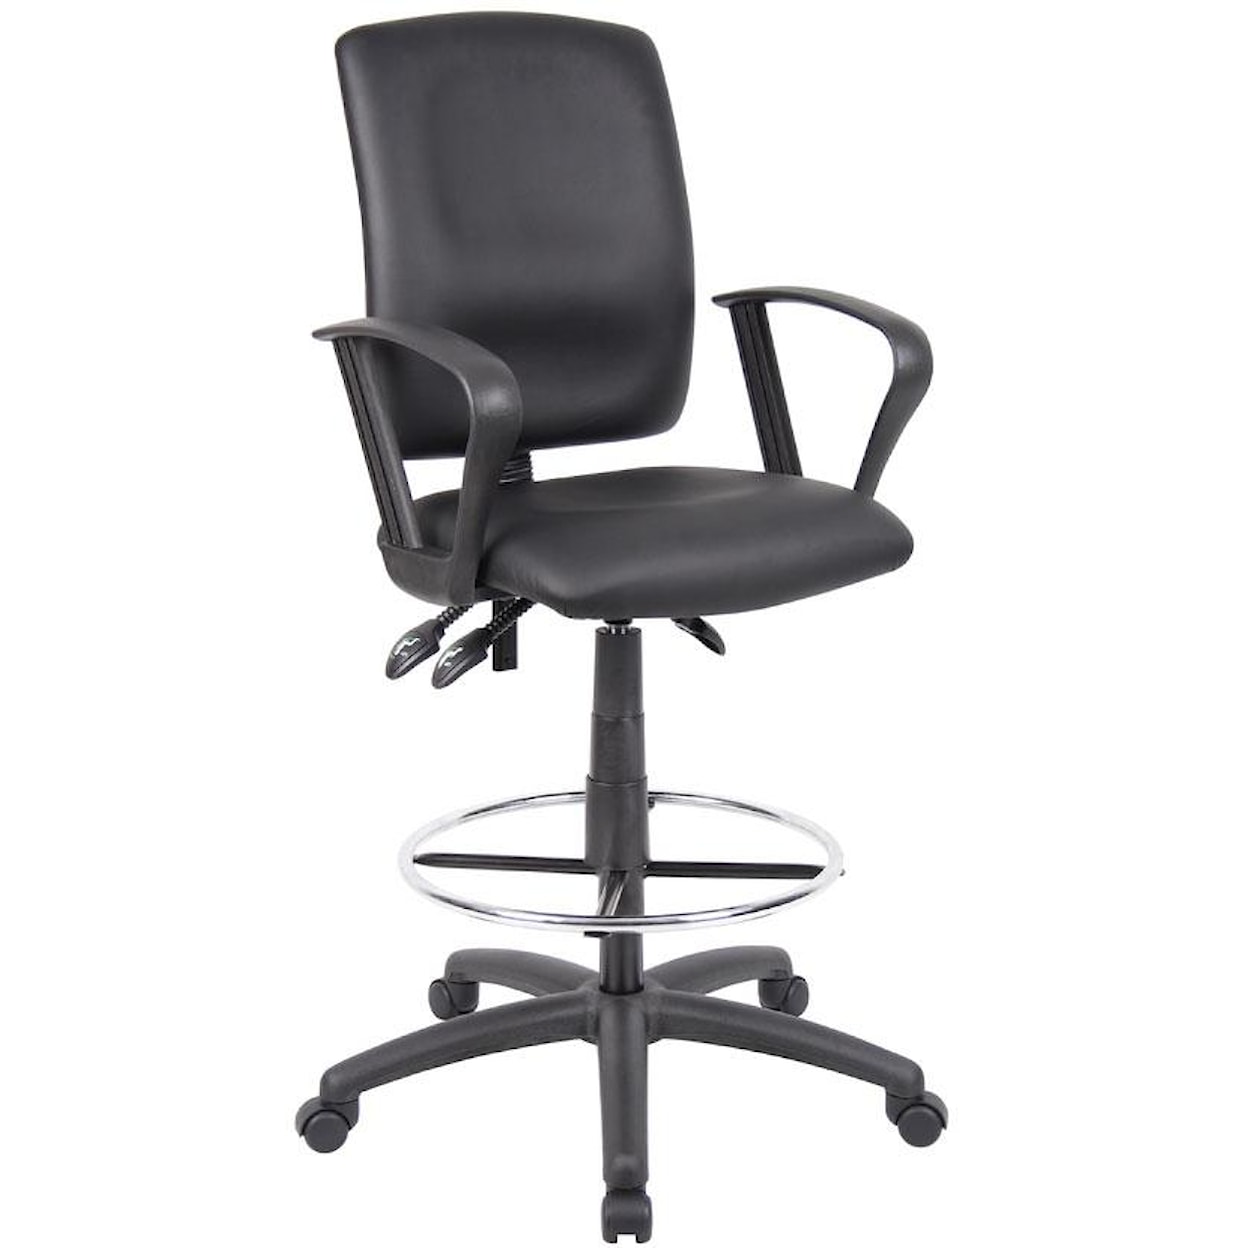 Presidential Seating Executive Chairs Multi-Function Drafting Stool